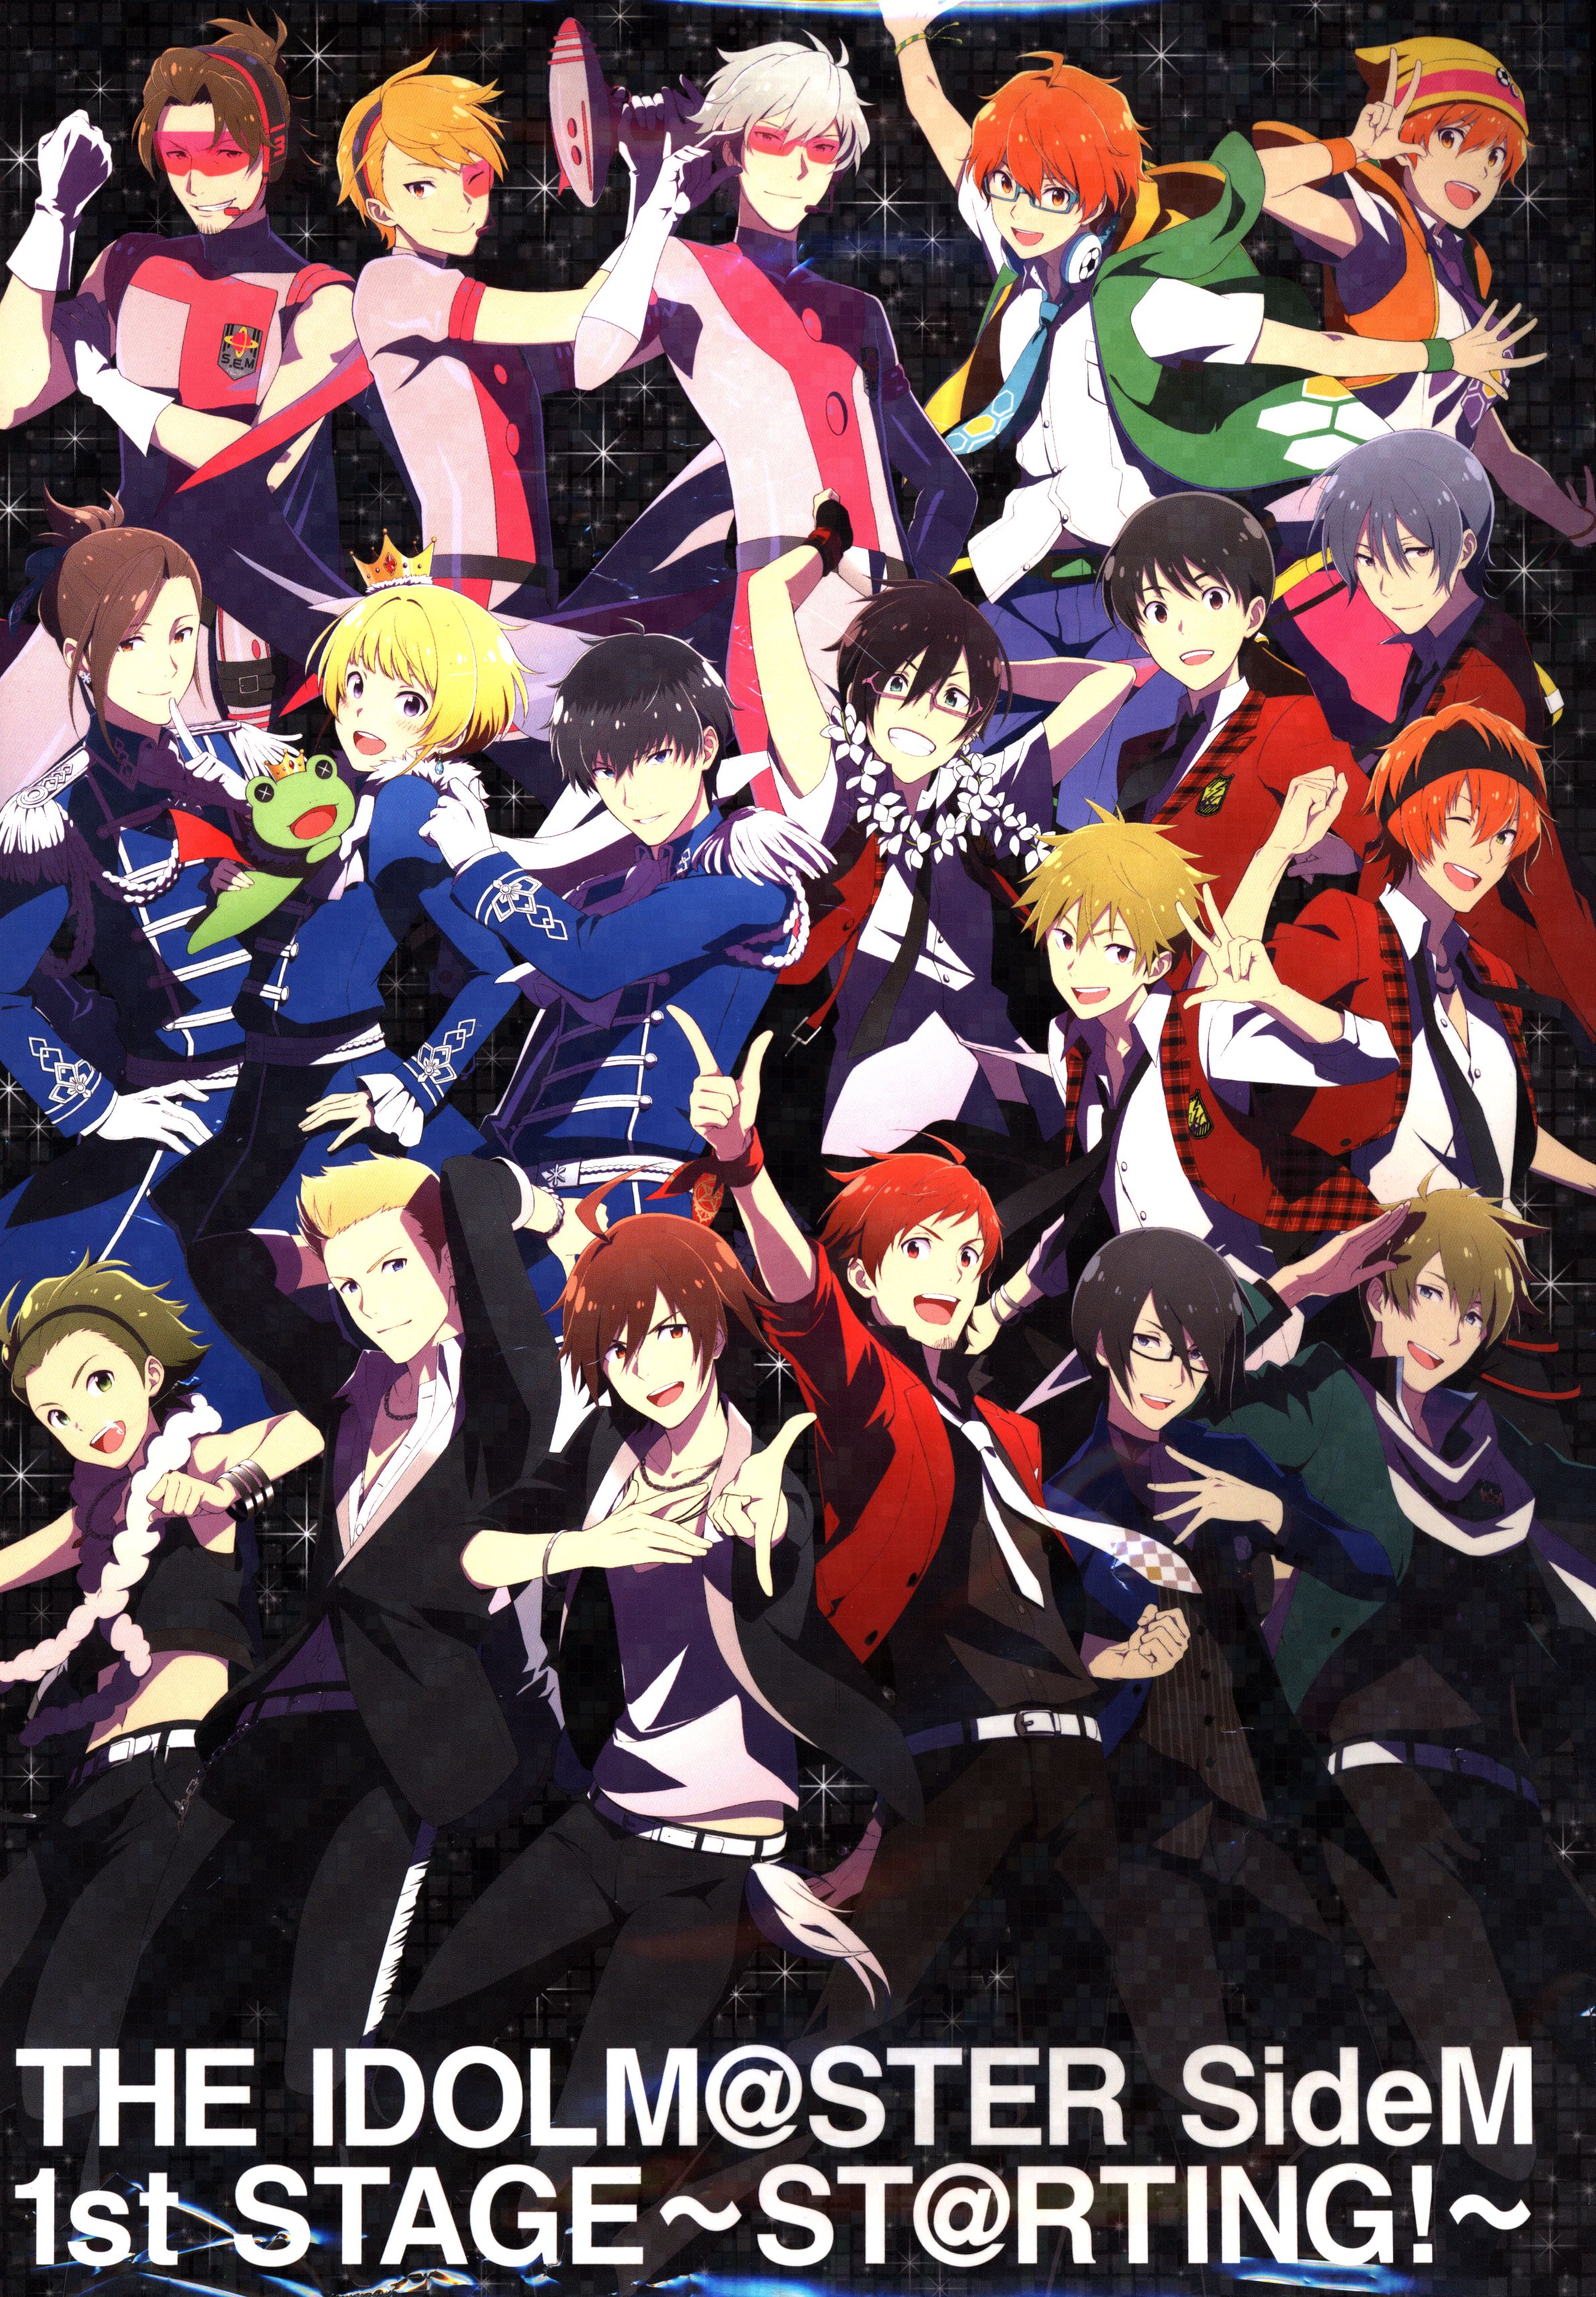 THE IDOLM @ STER SideM 1st STAGE ~ ST @ RTING! ~ Official Pamphlet